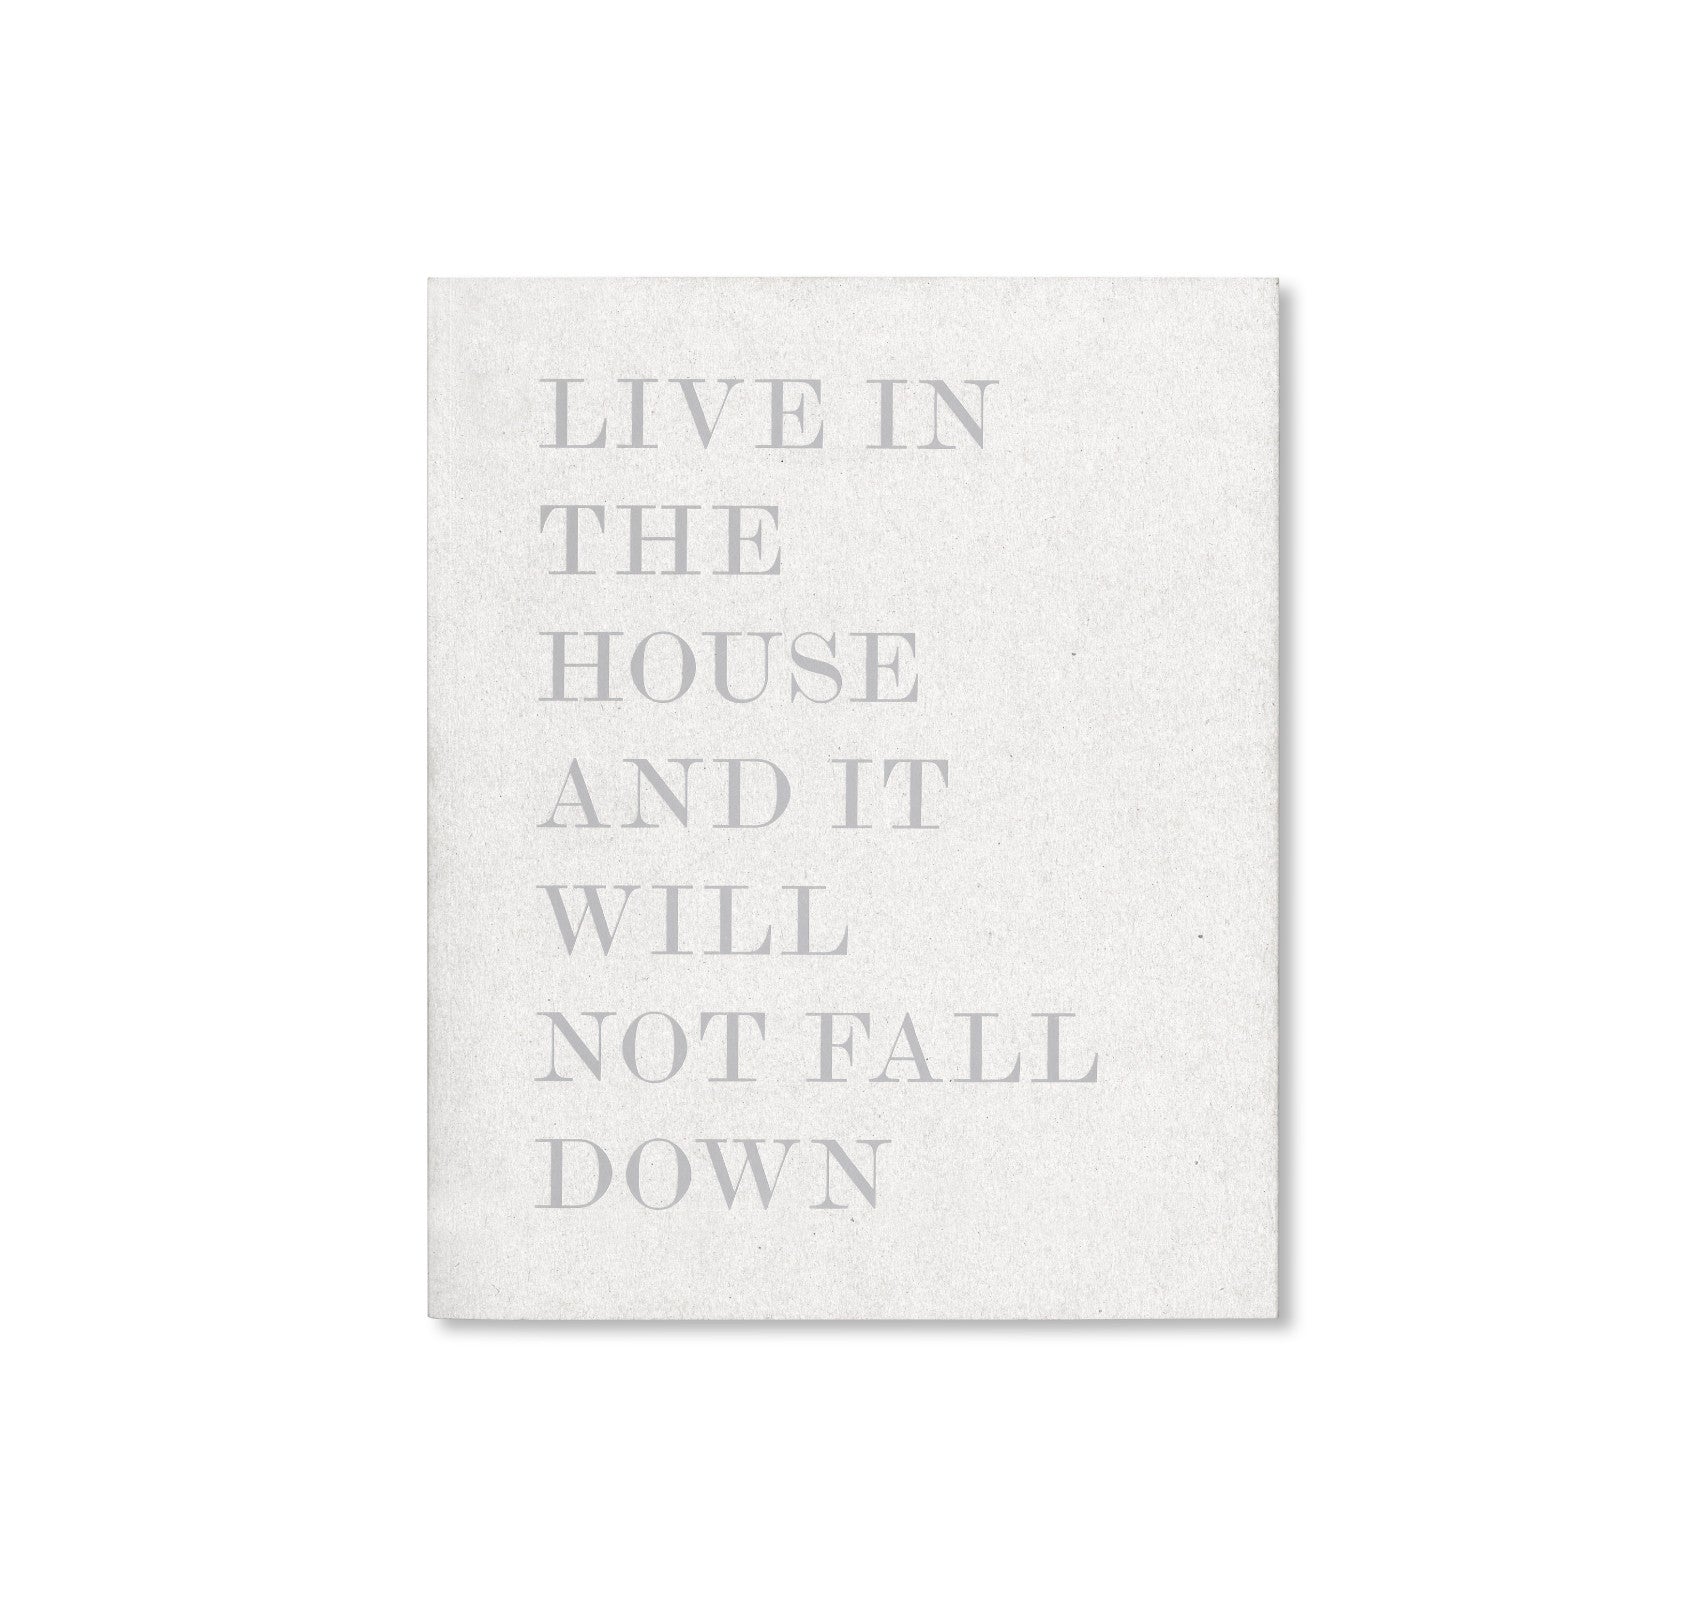 LIVE IN THE HOUSE AND IT WILL NOT FALL DOWN by Alessandro Laita + Chiaralice Rizzi